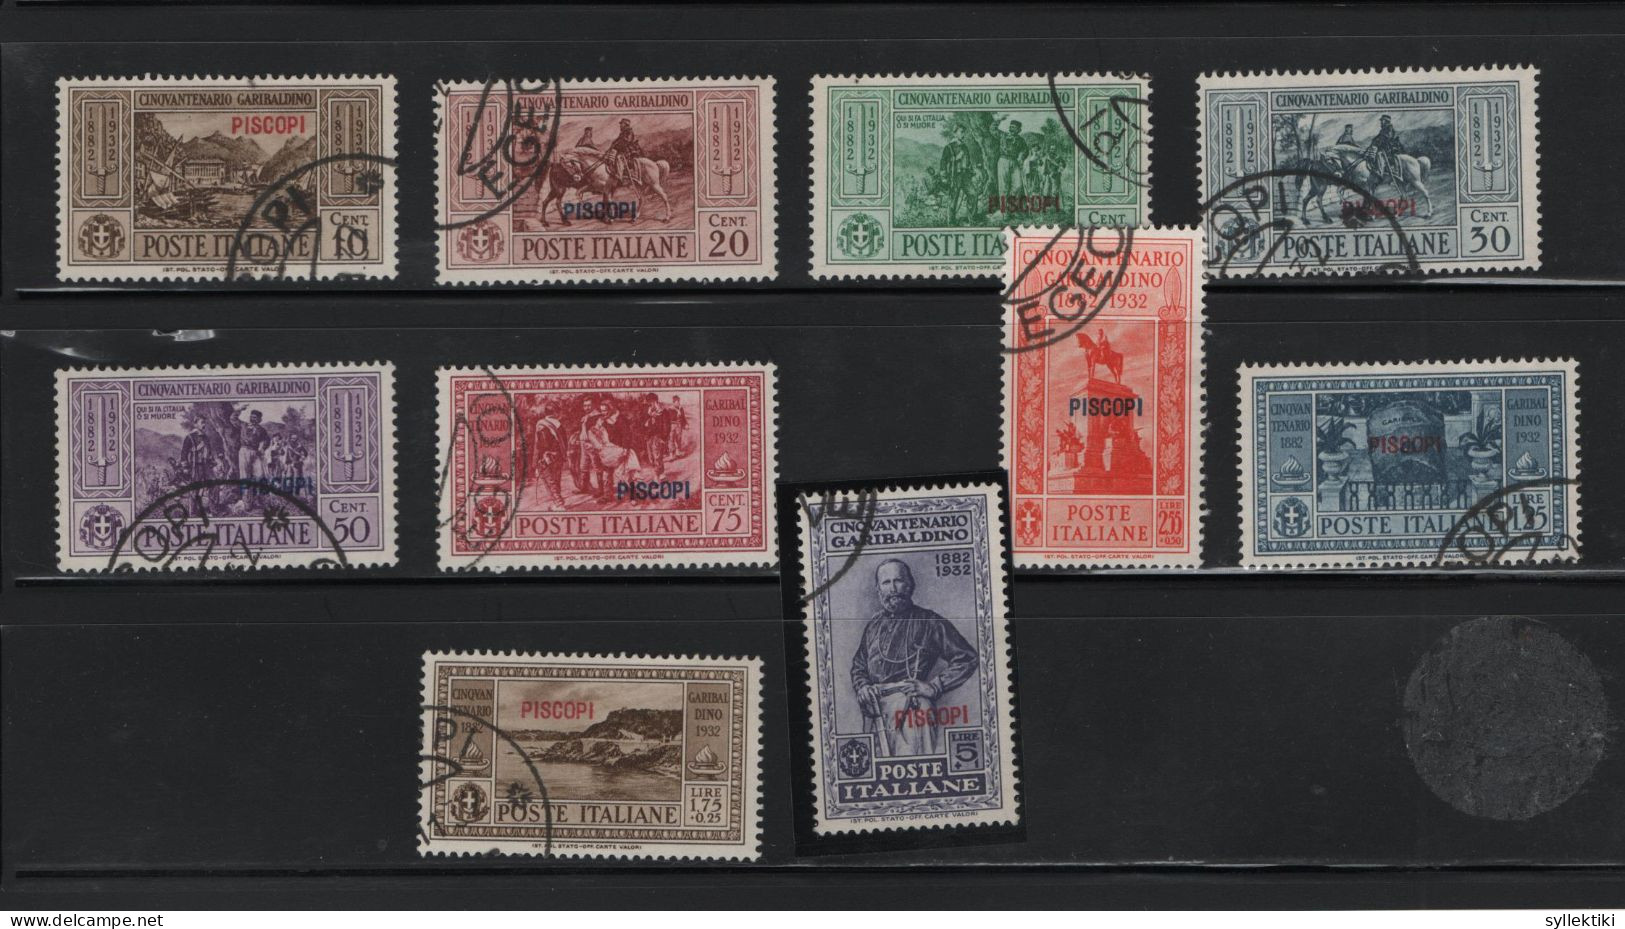 GREECE 1932 DODECANESE GARIBALDI ISSUE PISCOPI OVERPRINT COMPLETE SET USED STAMPS   HELLAS No 108II - 117II AND VALUE E - Dodecanese